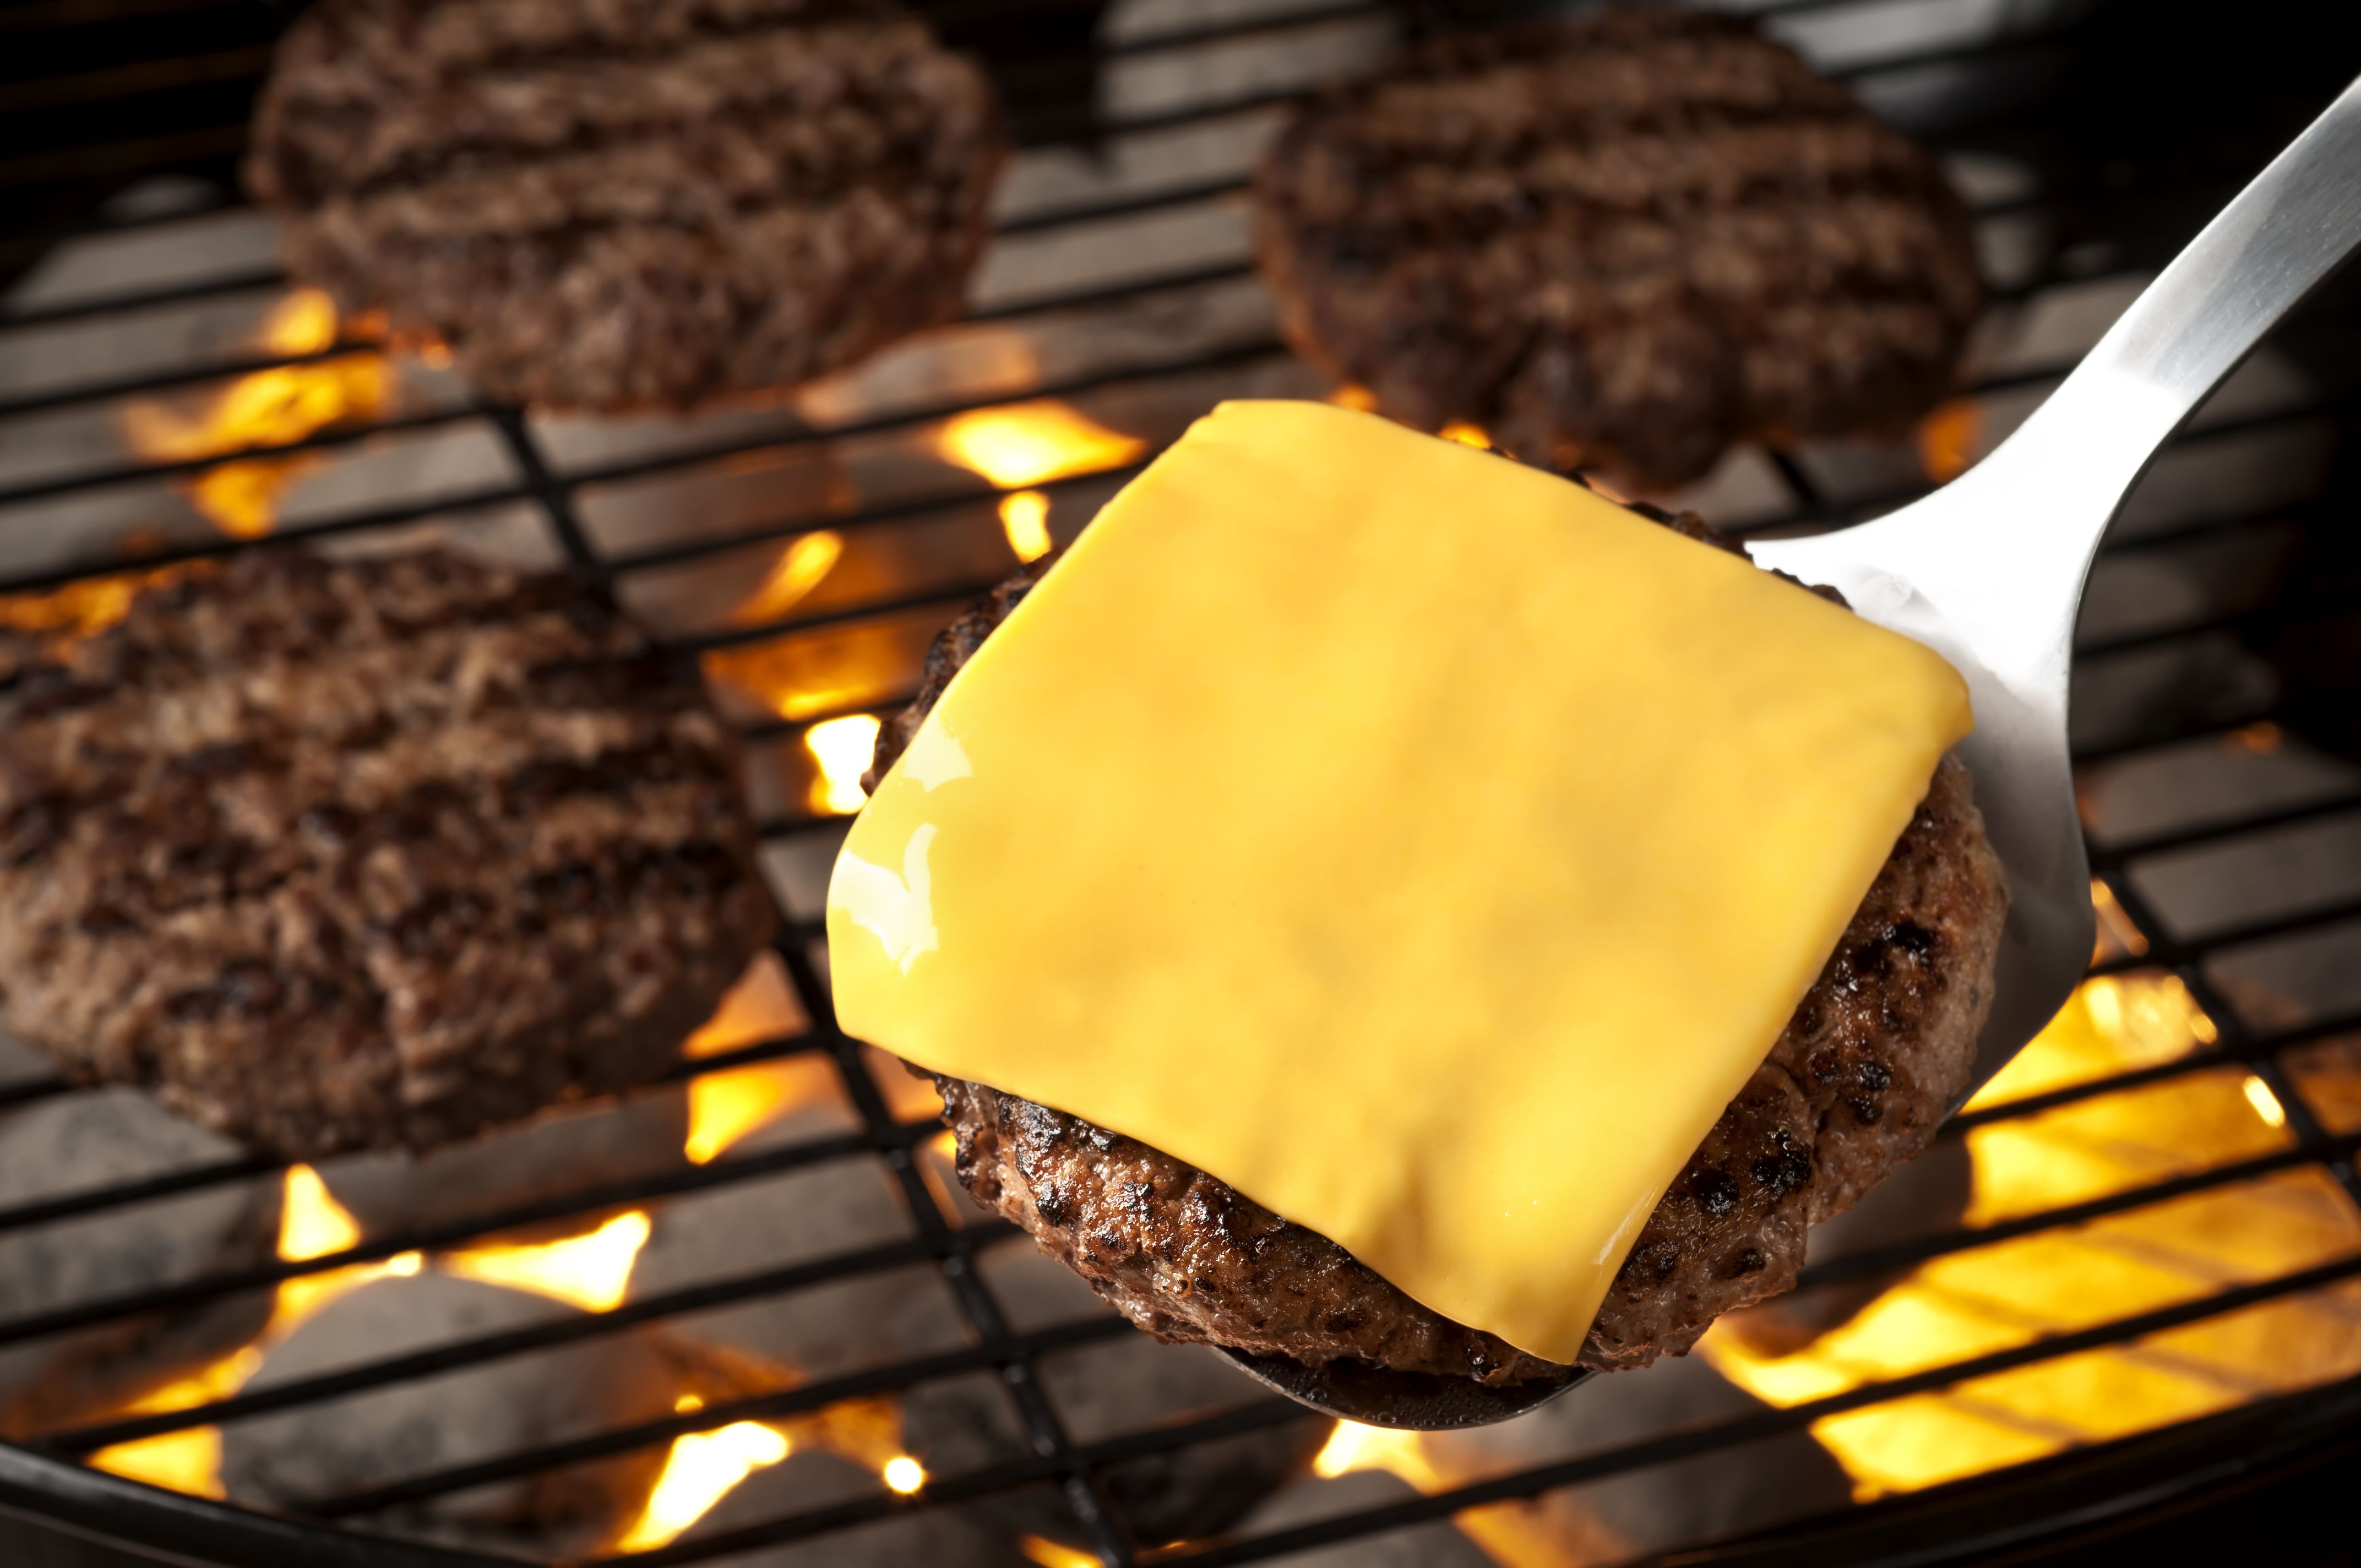 Cheeseburger Nutrition: Calories and Health Benefits